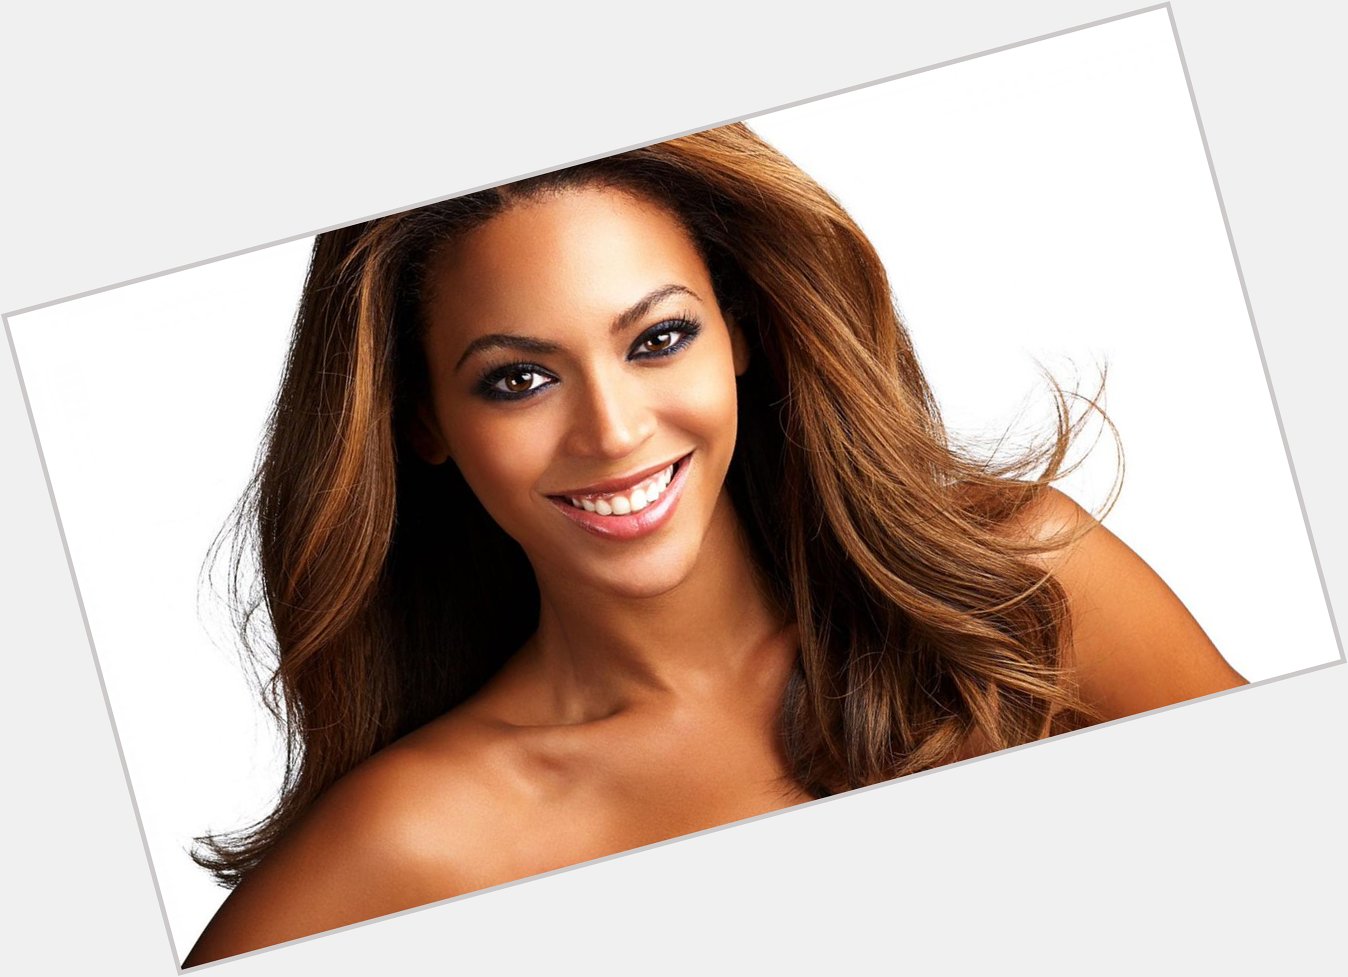 Happy 34th birthday today to Beyoncé Knowles.  